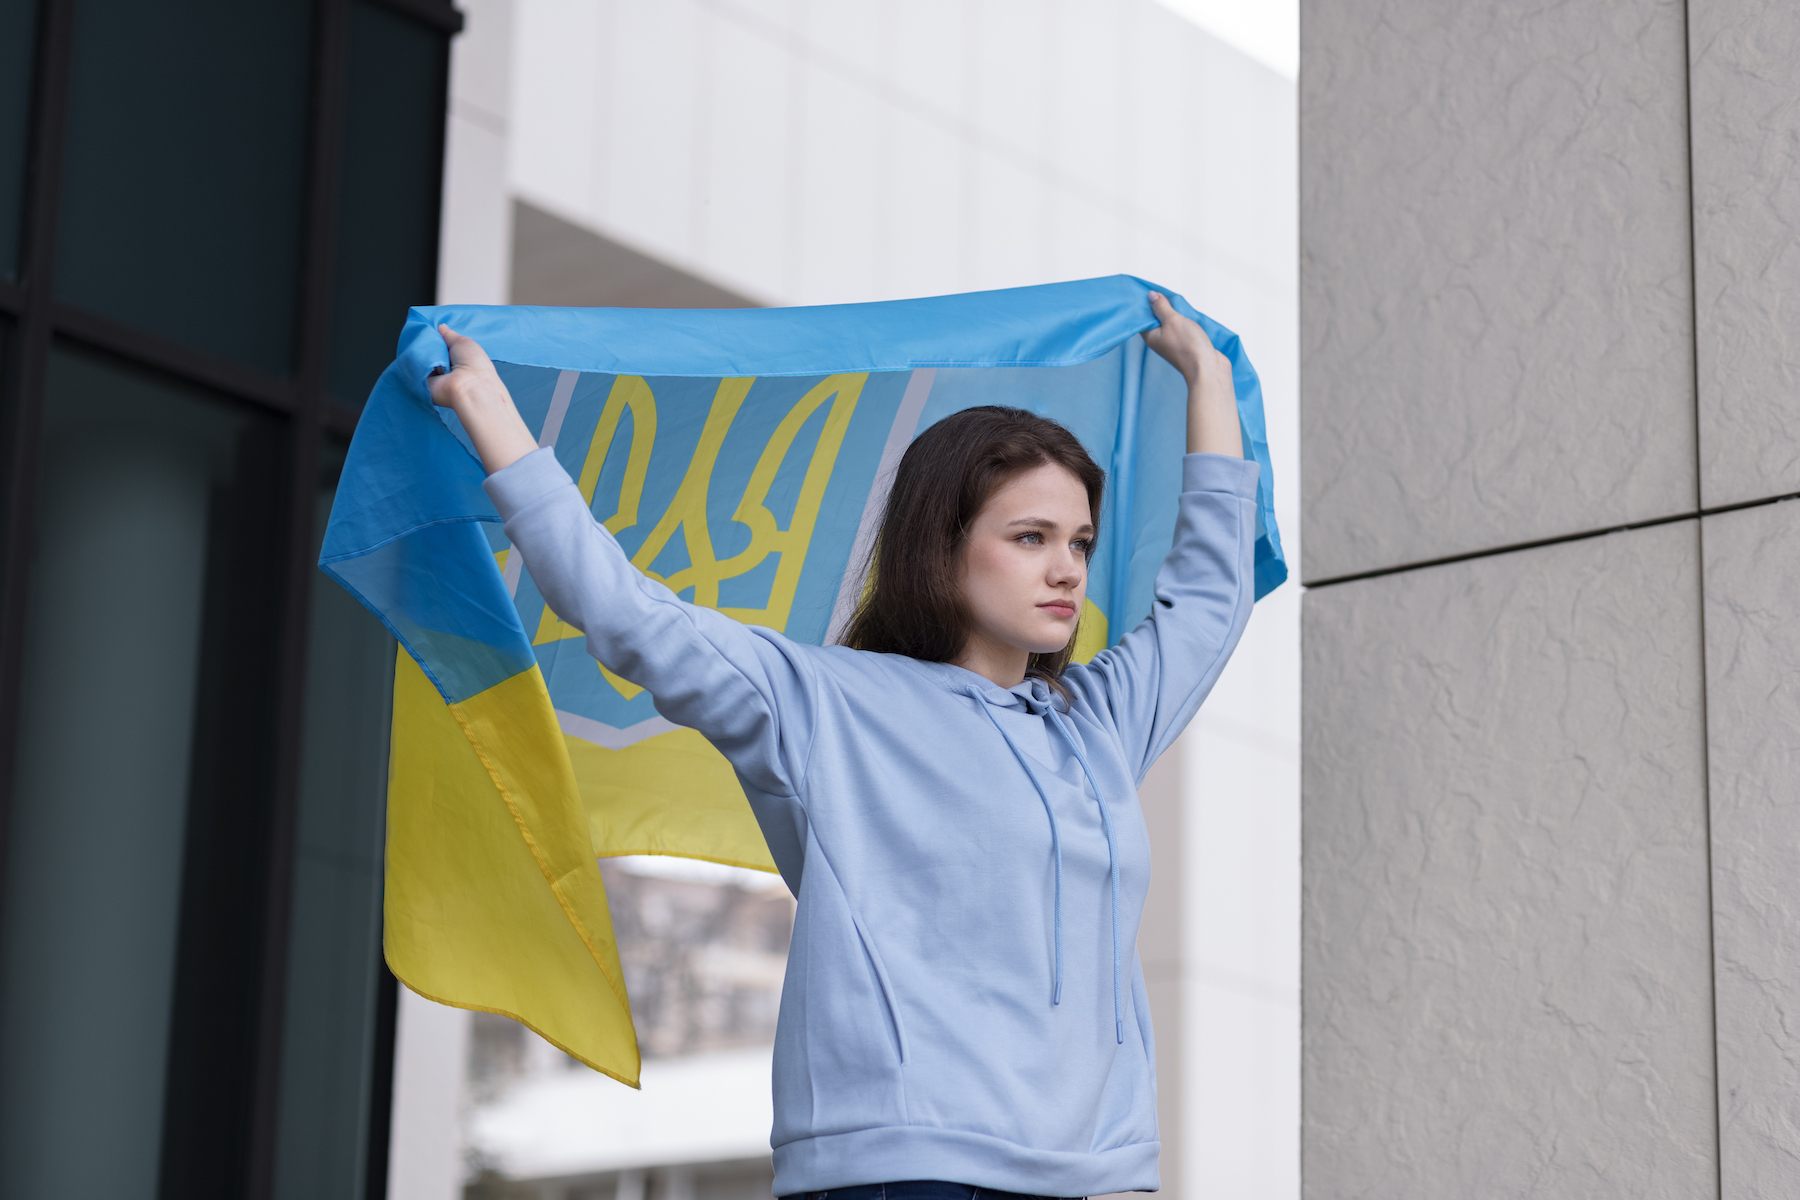 A looking forward young woman with brown hair and light blue sweater is holding a Ukraine flag above and behind her head with raised arms.